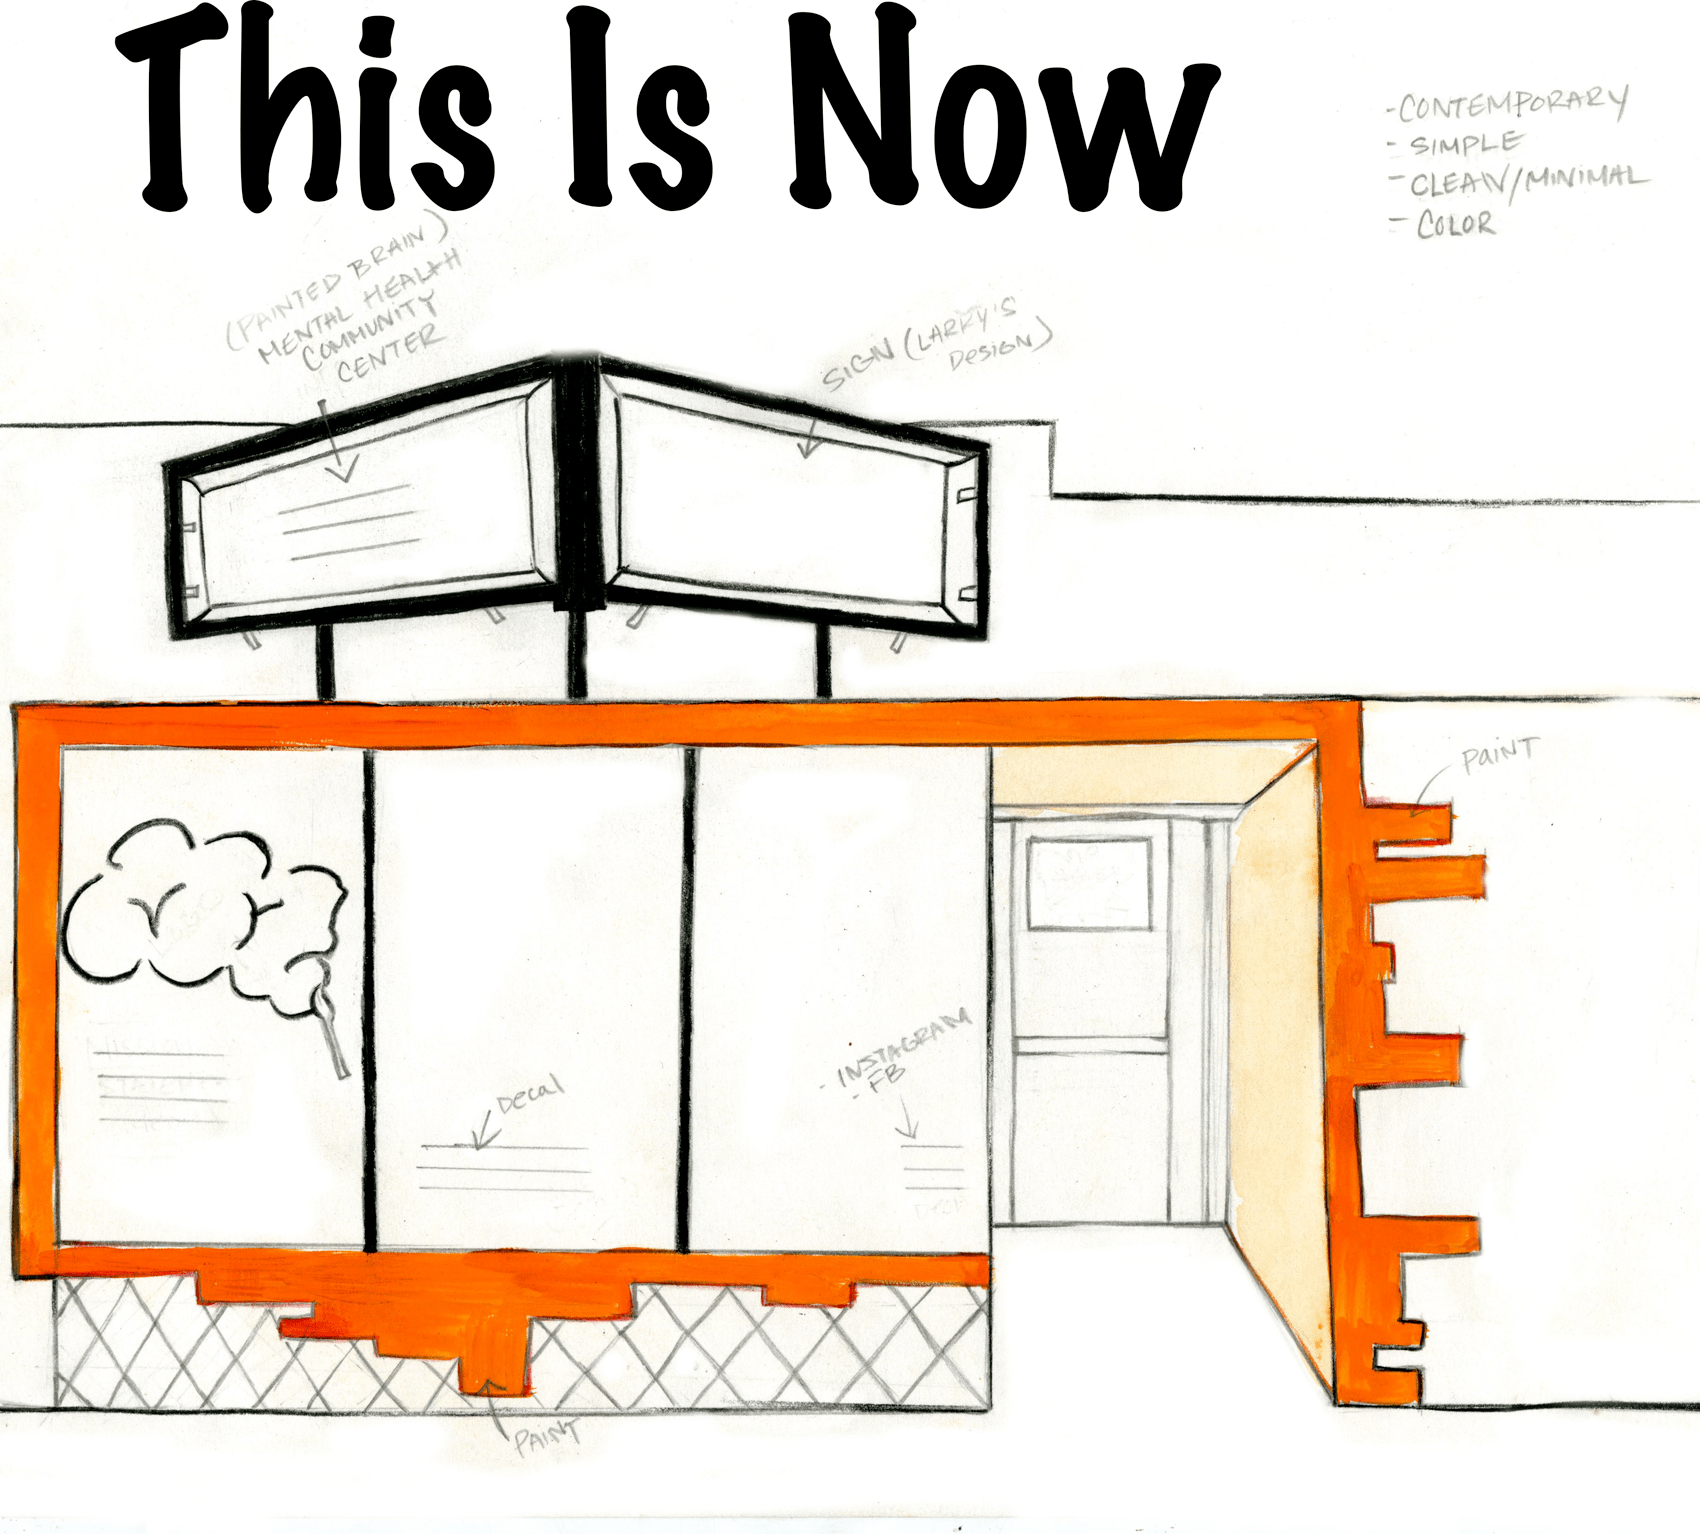 Illustration of the Community Center with the text This is Now on the top